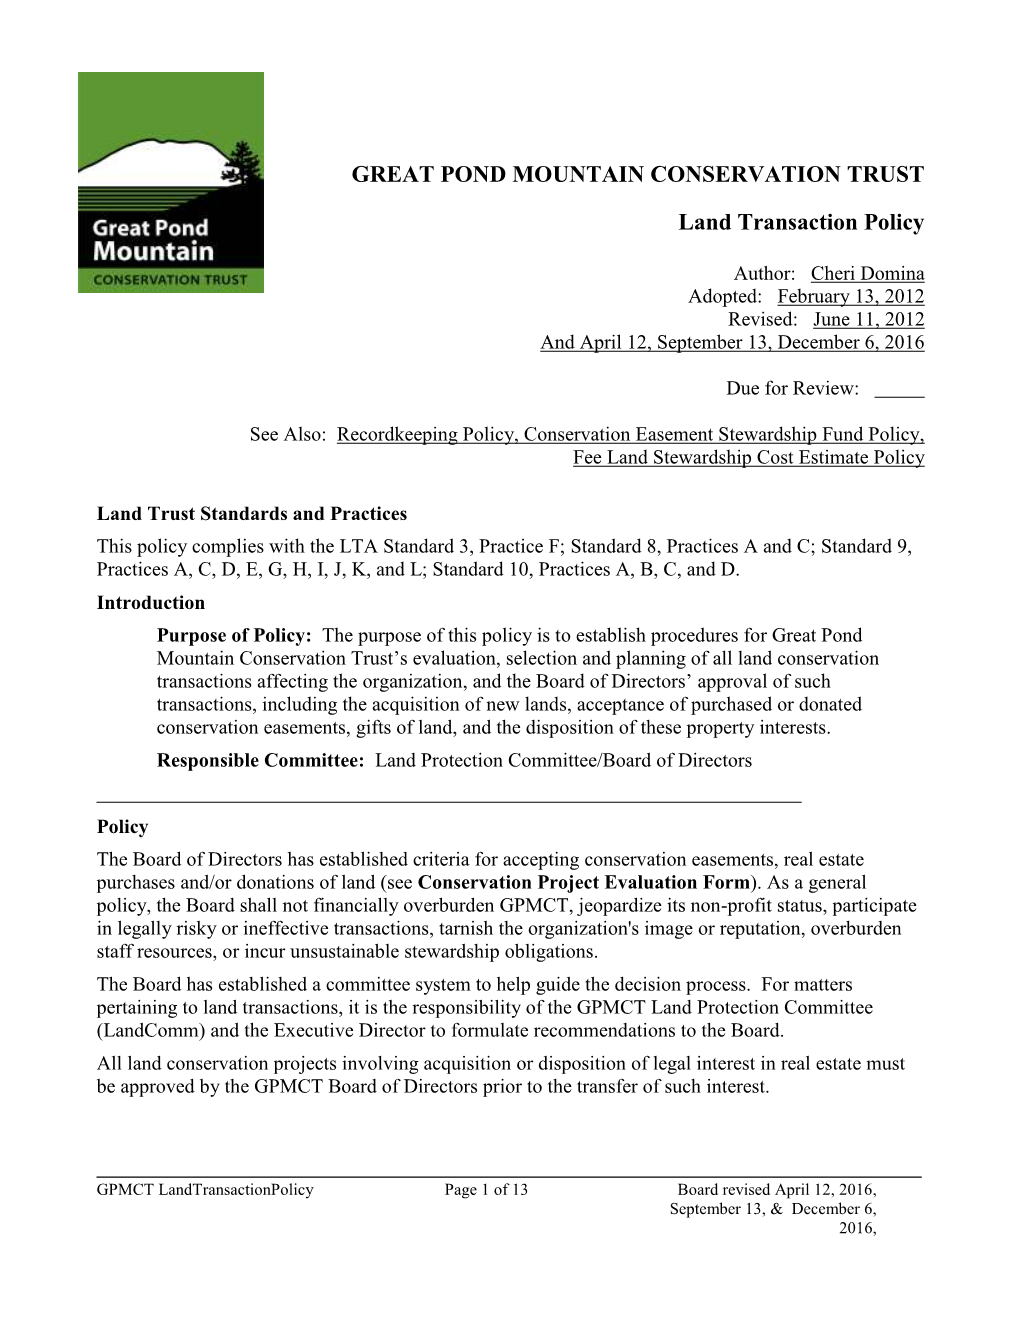 Land Trust Standards and Practices